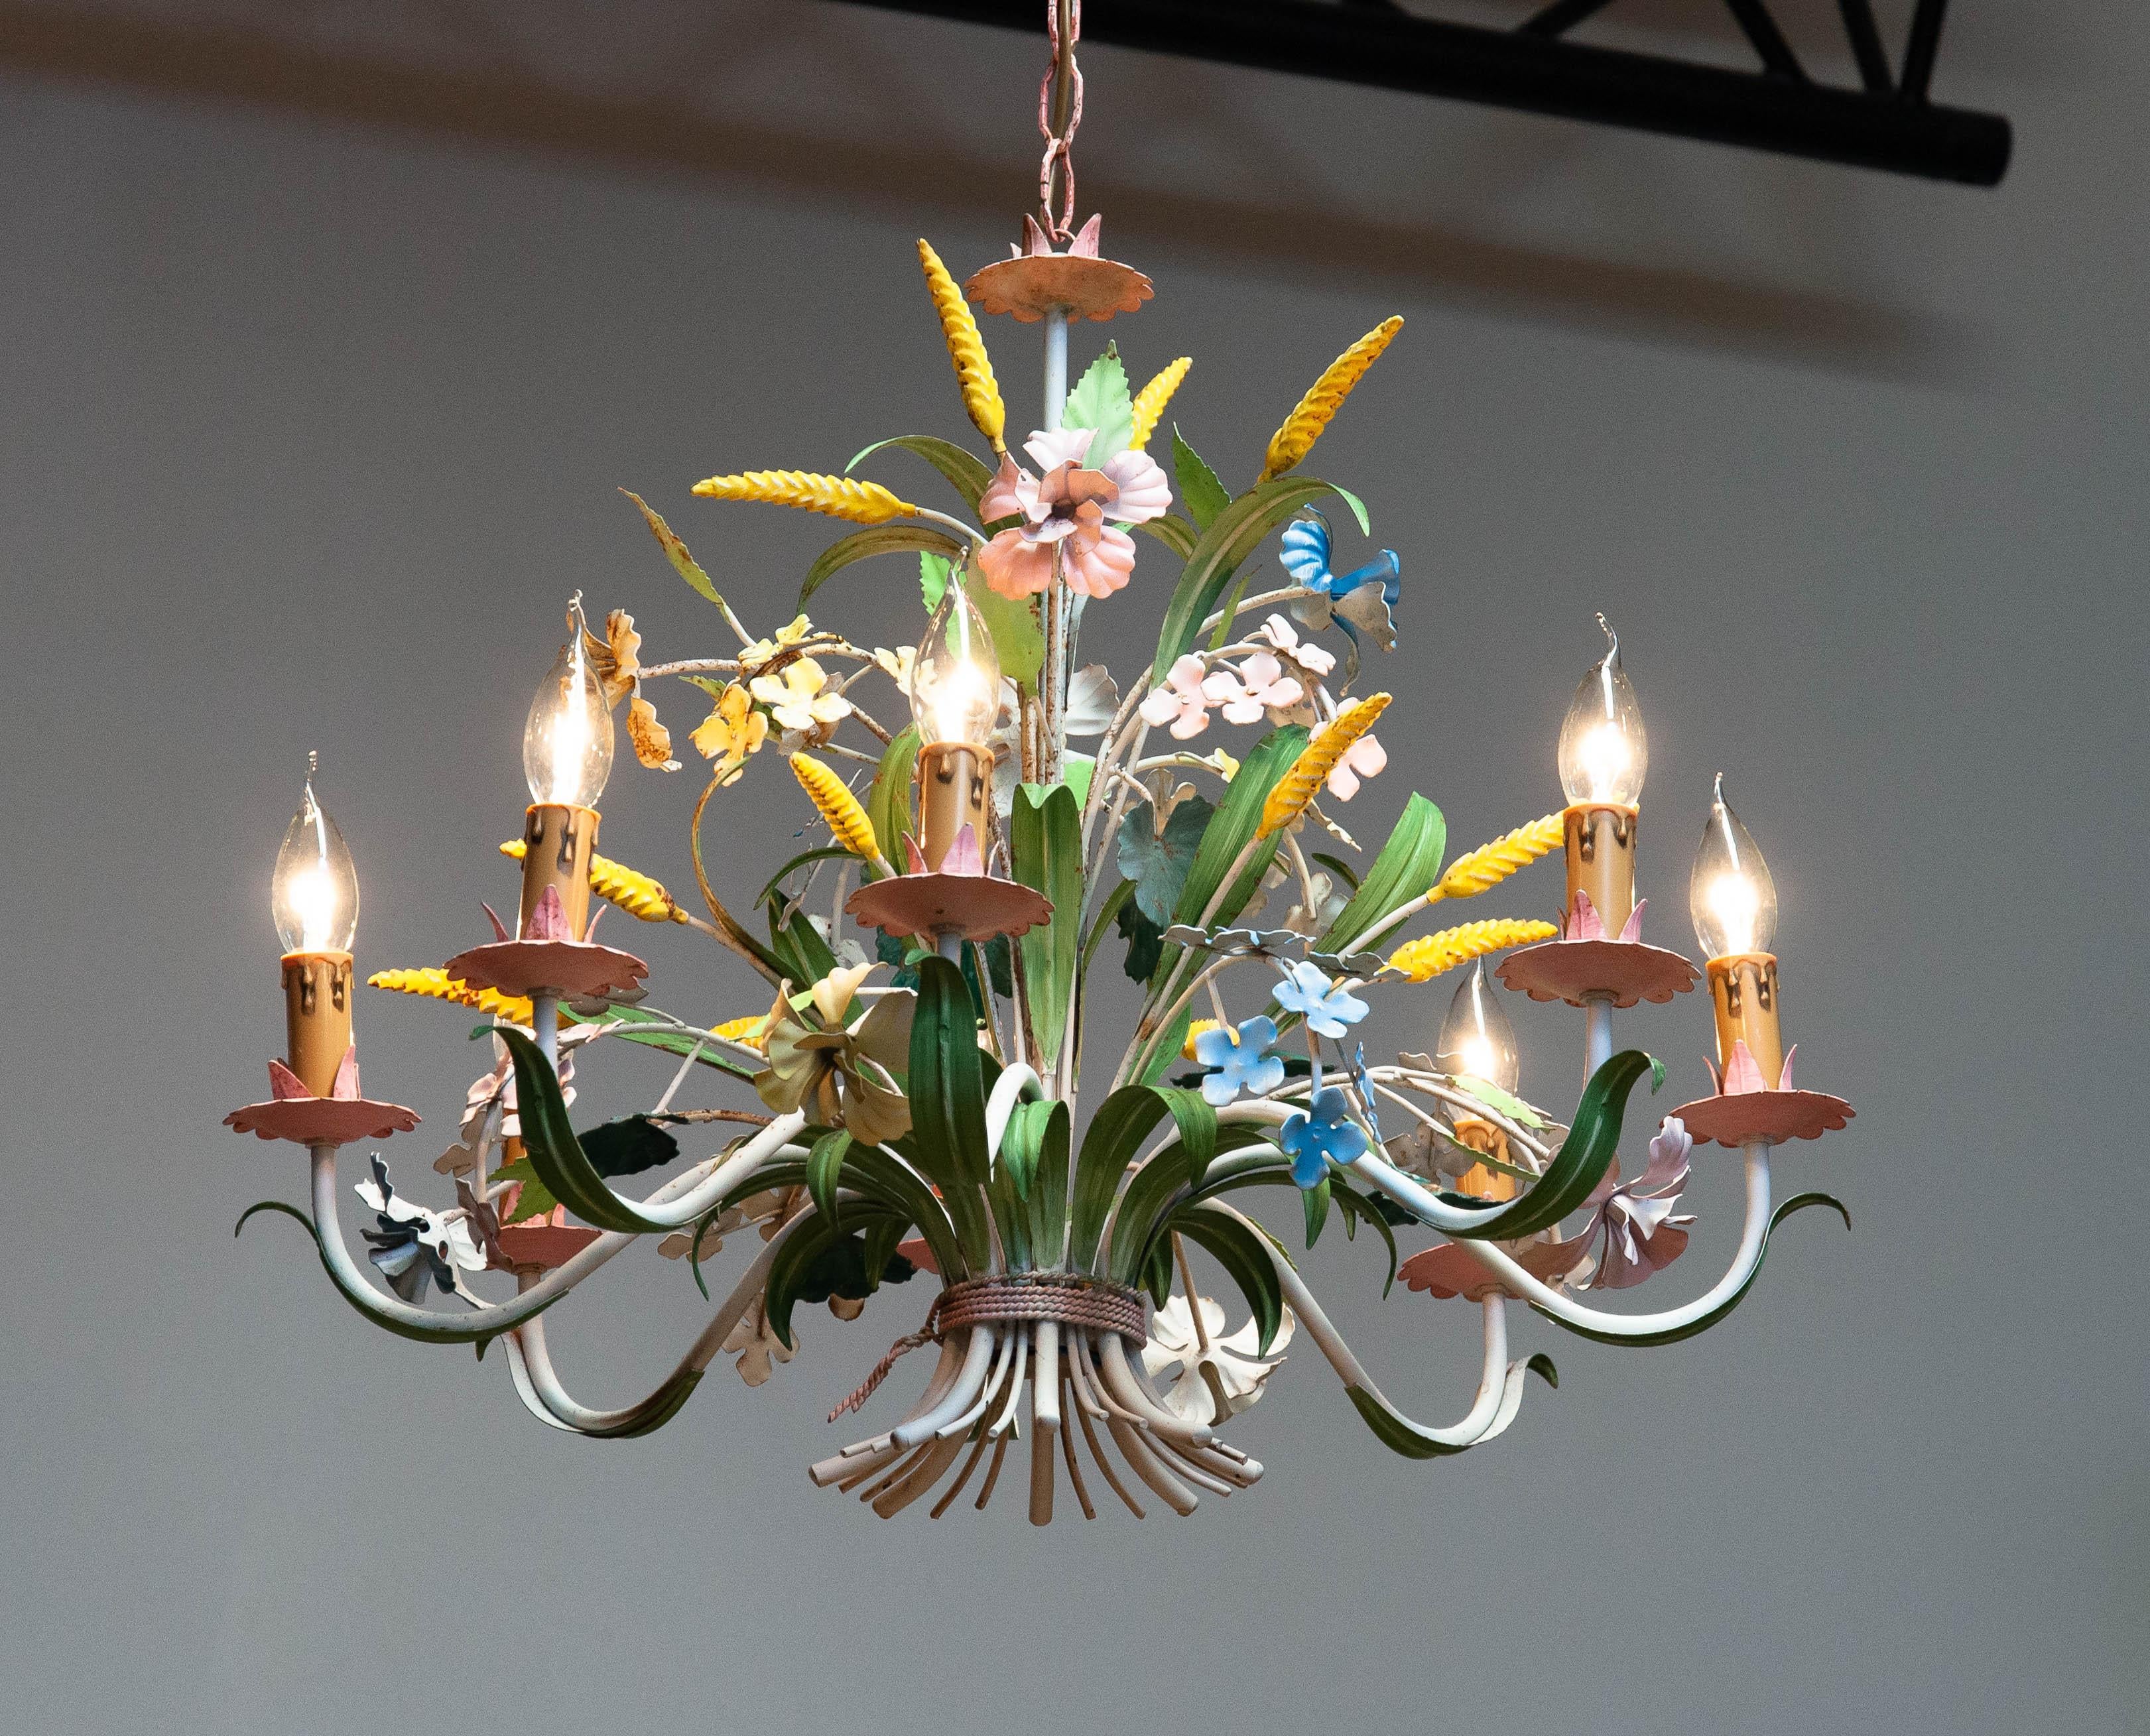 1950s Large Boho Chic Italian Tole Painted Metal Chandelier With Floral Decor 1